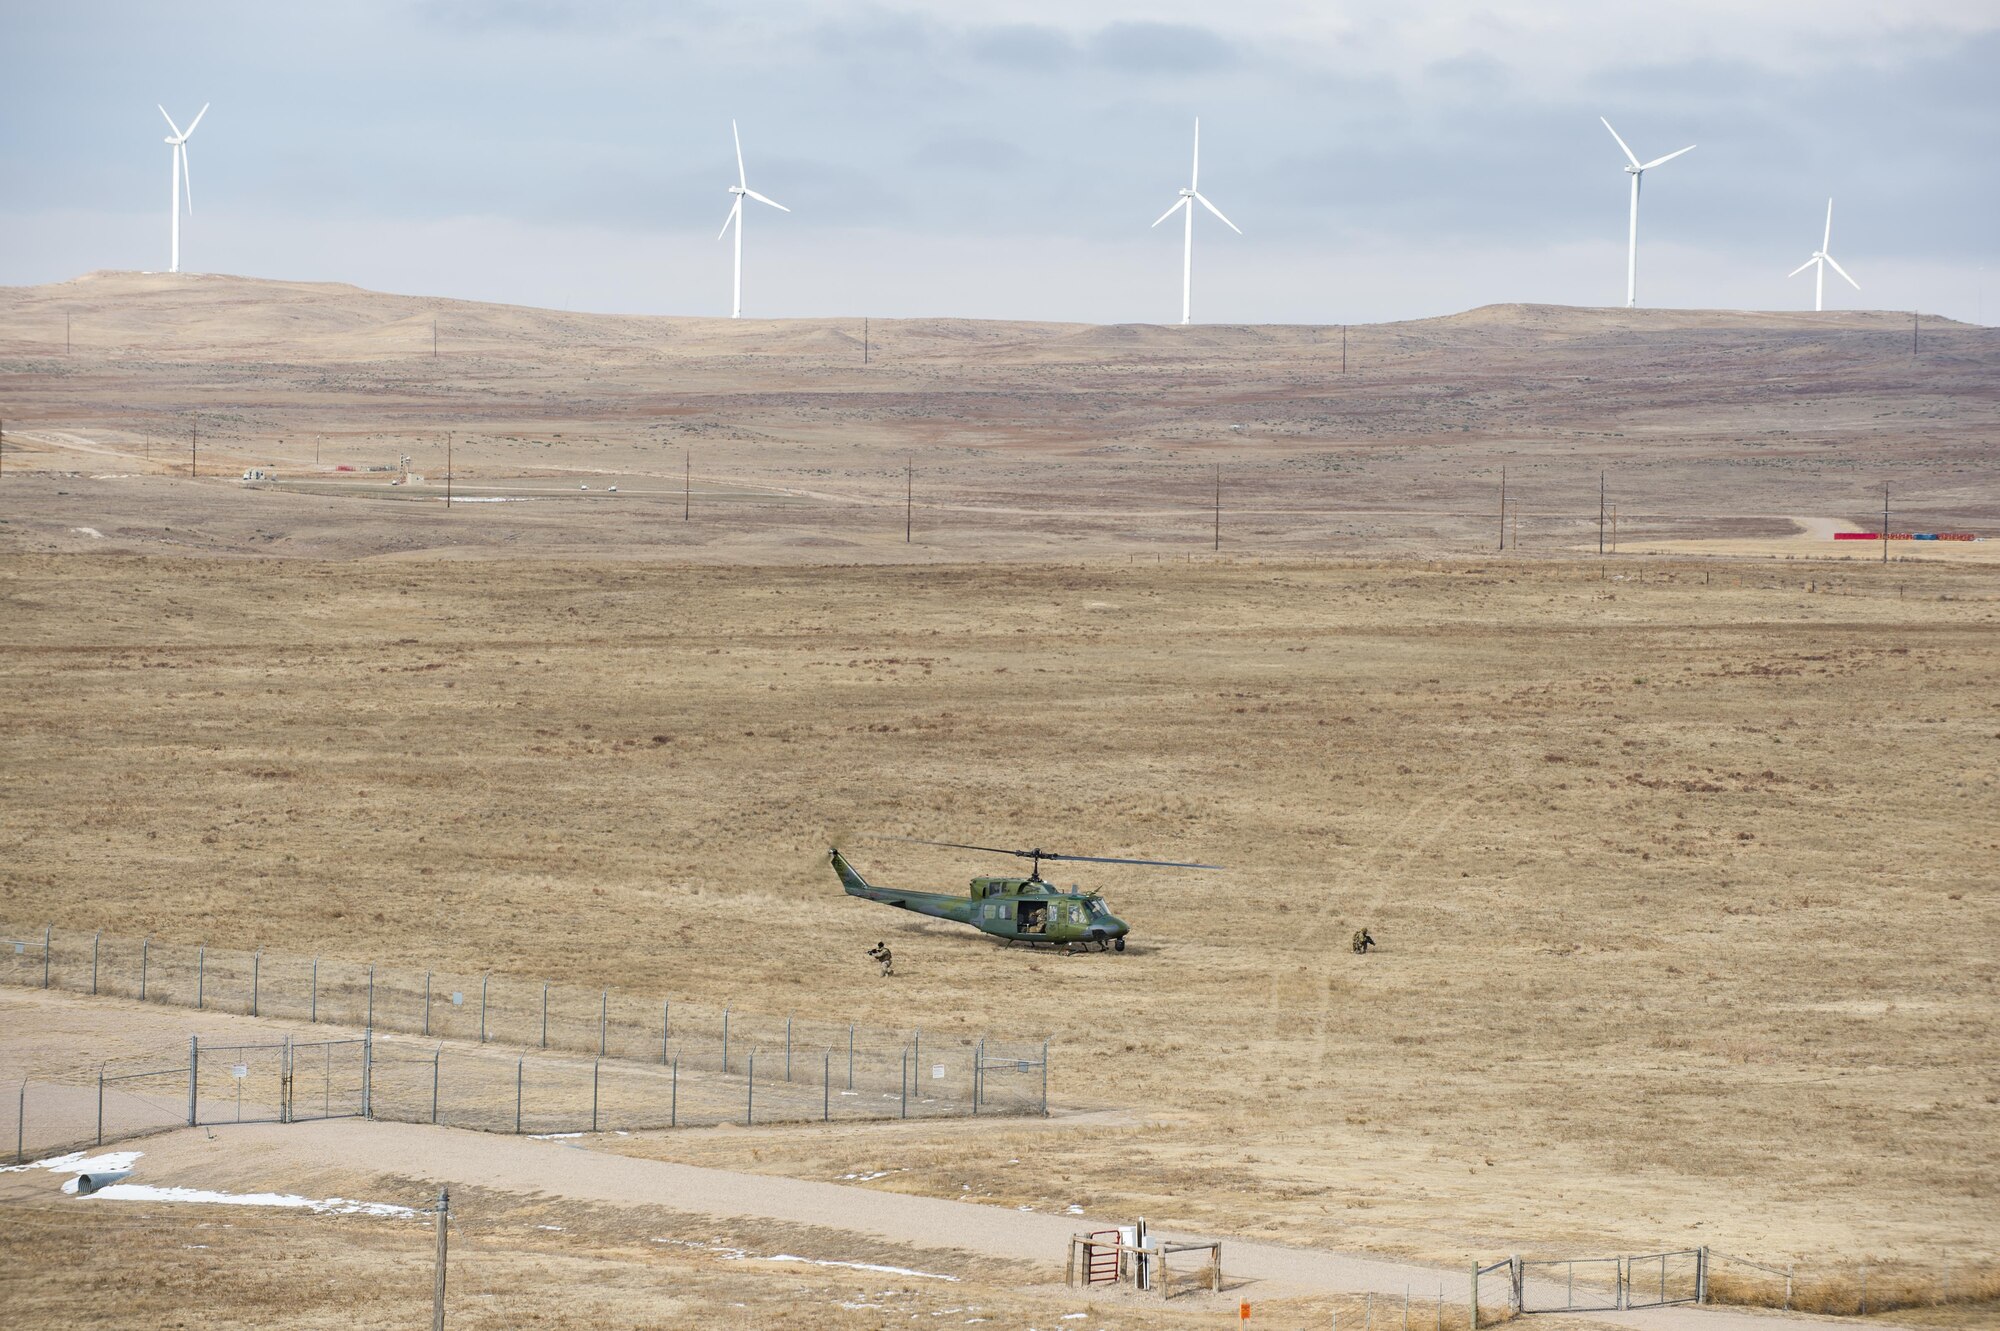 A 790th Missile Security Forces Squadron fireteam gets into position during emergency security response training with the 37th Helicopter Squadron at a launch facility in the F.E. Warren Air Force Base, Wyo., missile complex, Dec. 16, 2016. Helicopter aircrews and tactical response force security forces members are the only forces routinely taught to recapture a LF. (U.S. Air Force photo by Staff Sgt. Christopher Ruano)